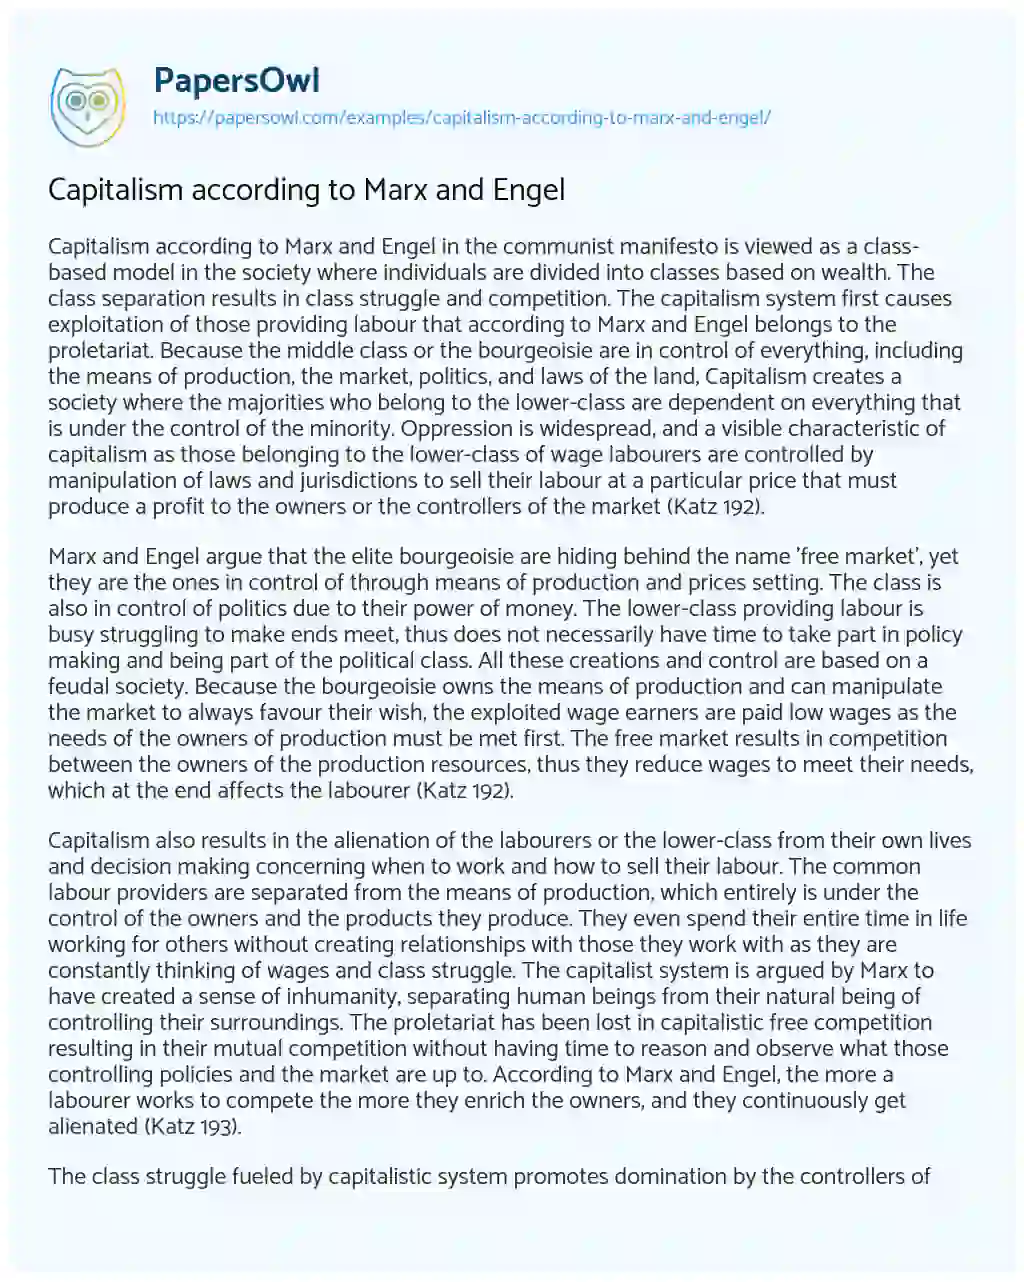 Capitalism According to Marx and Engel essay